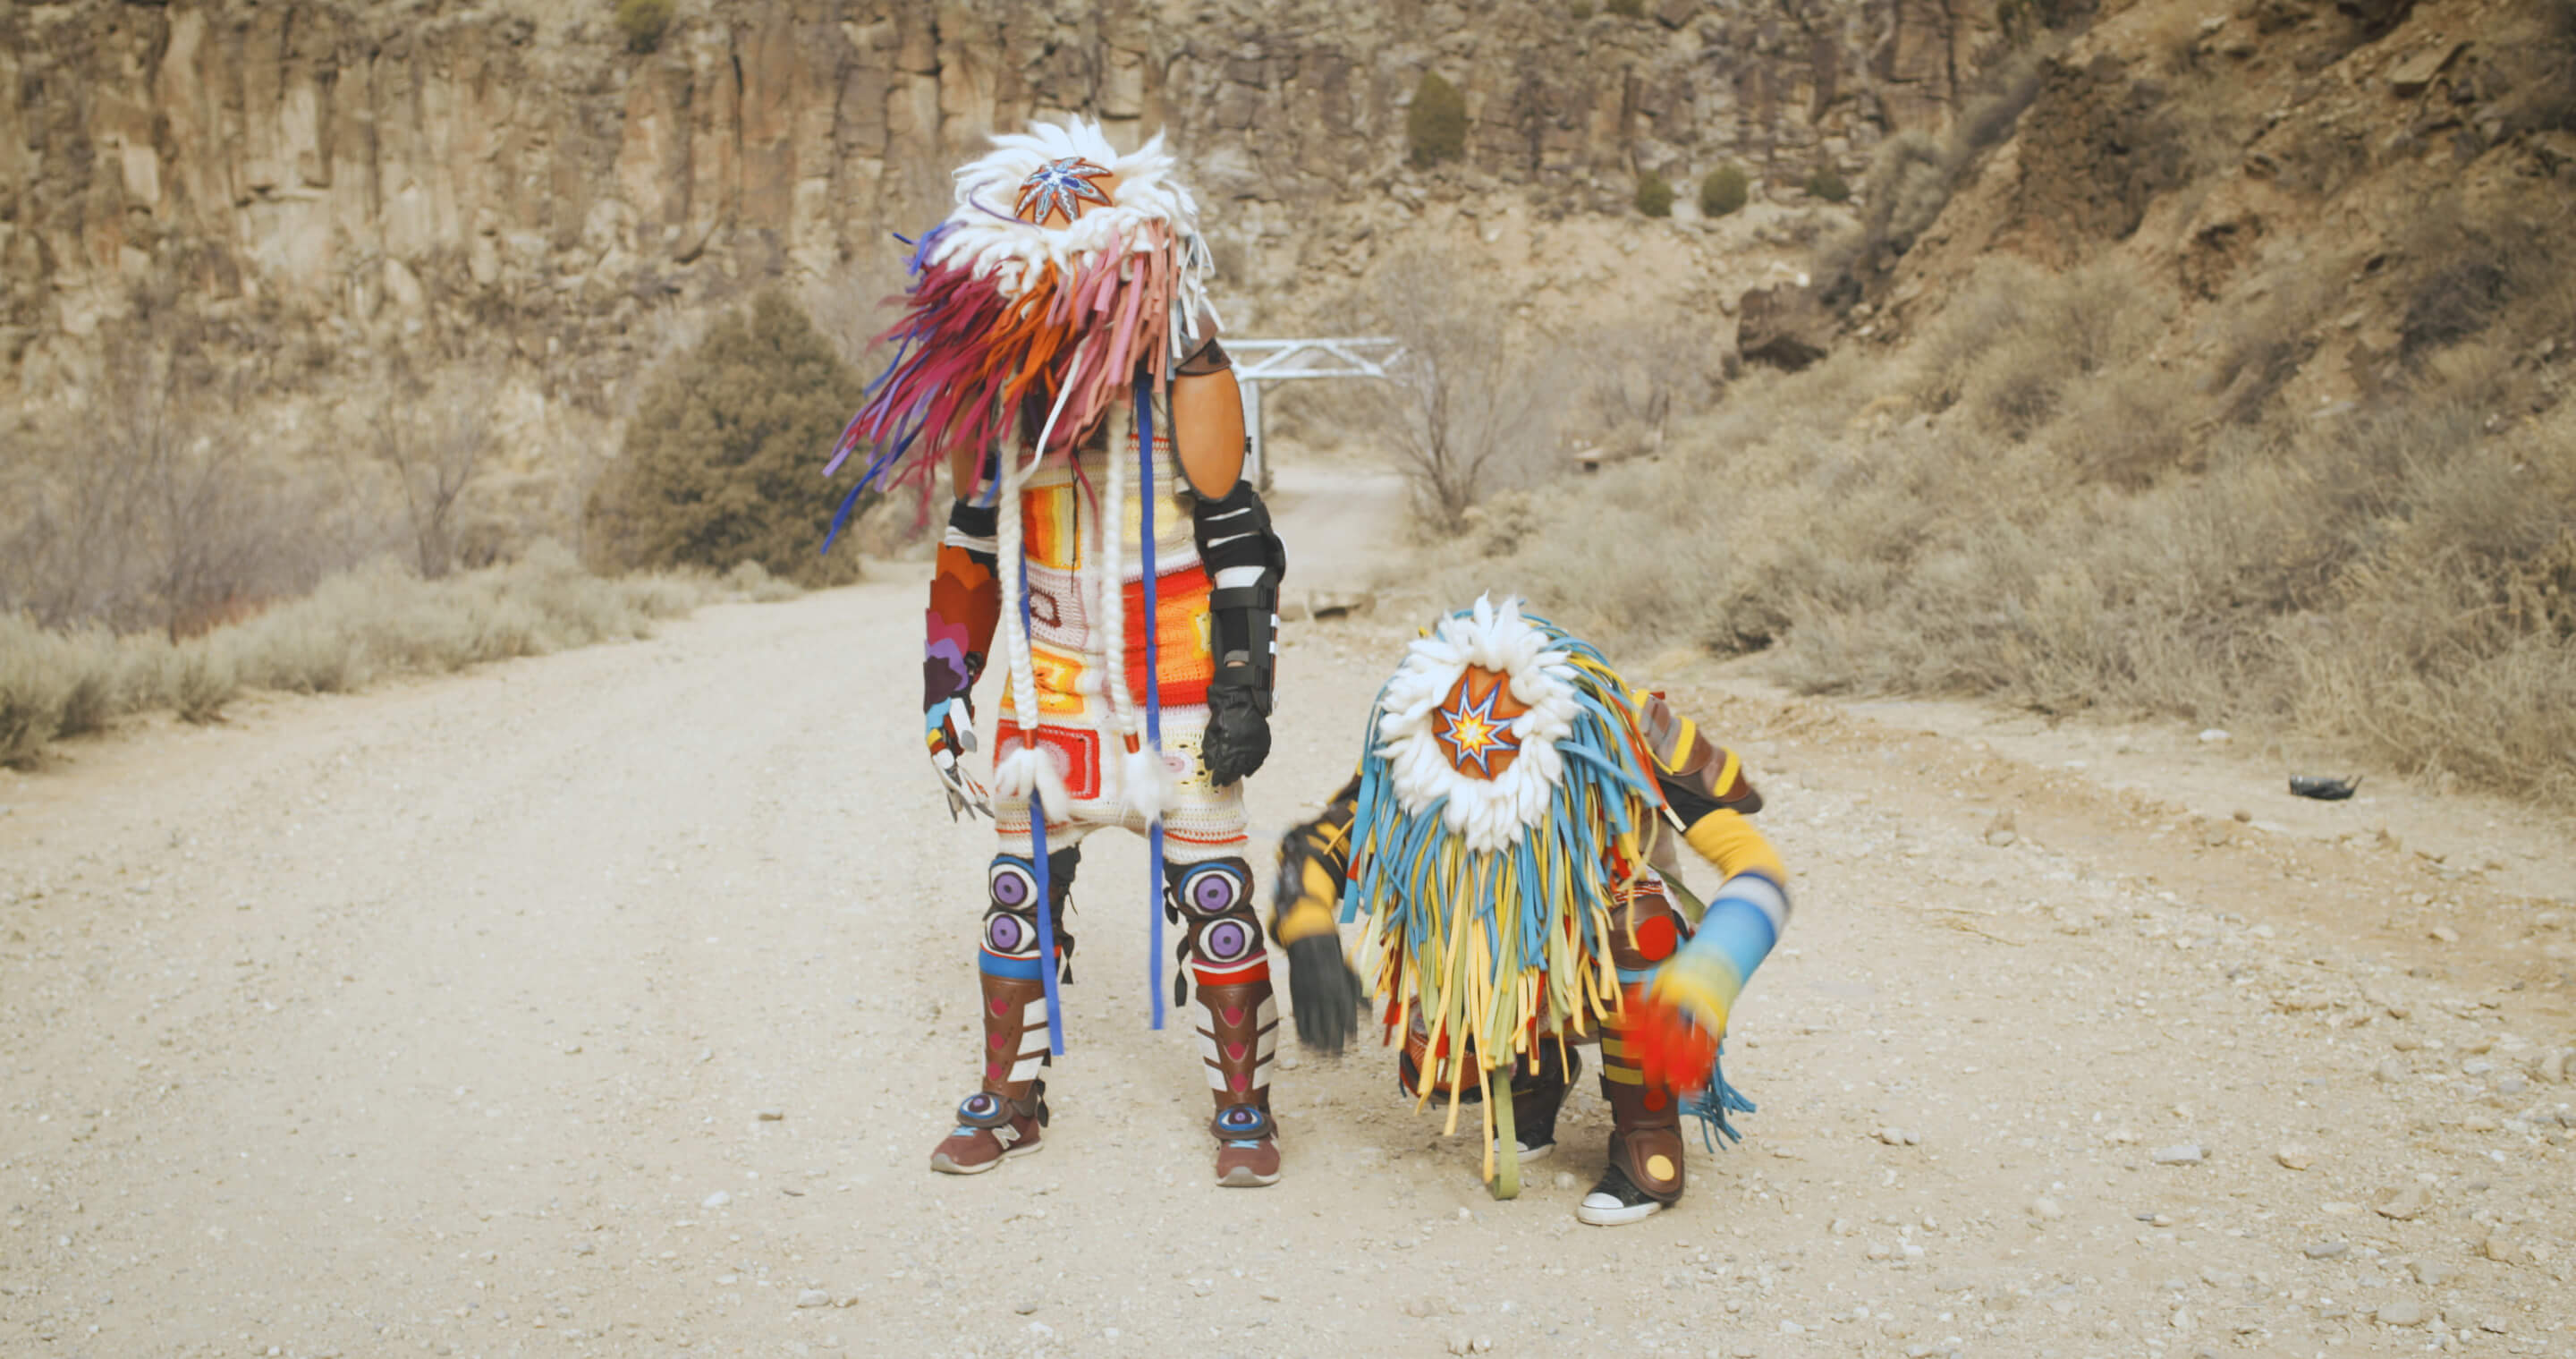 two people in a desert landscape wearing colorful costumes